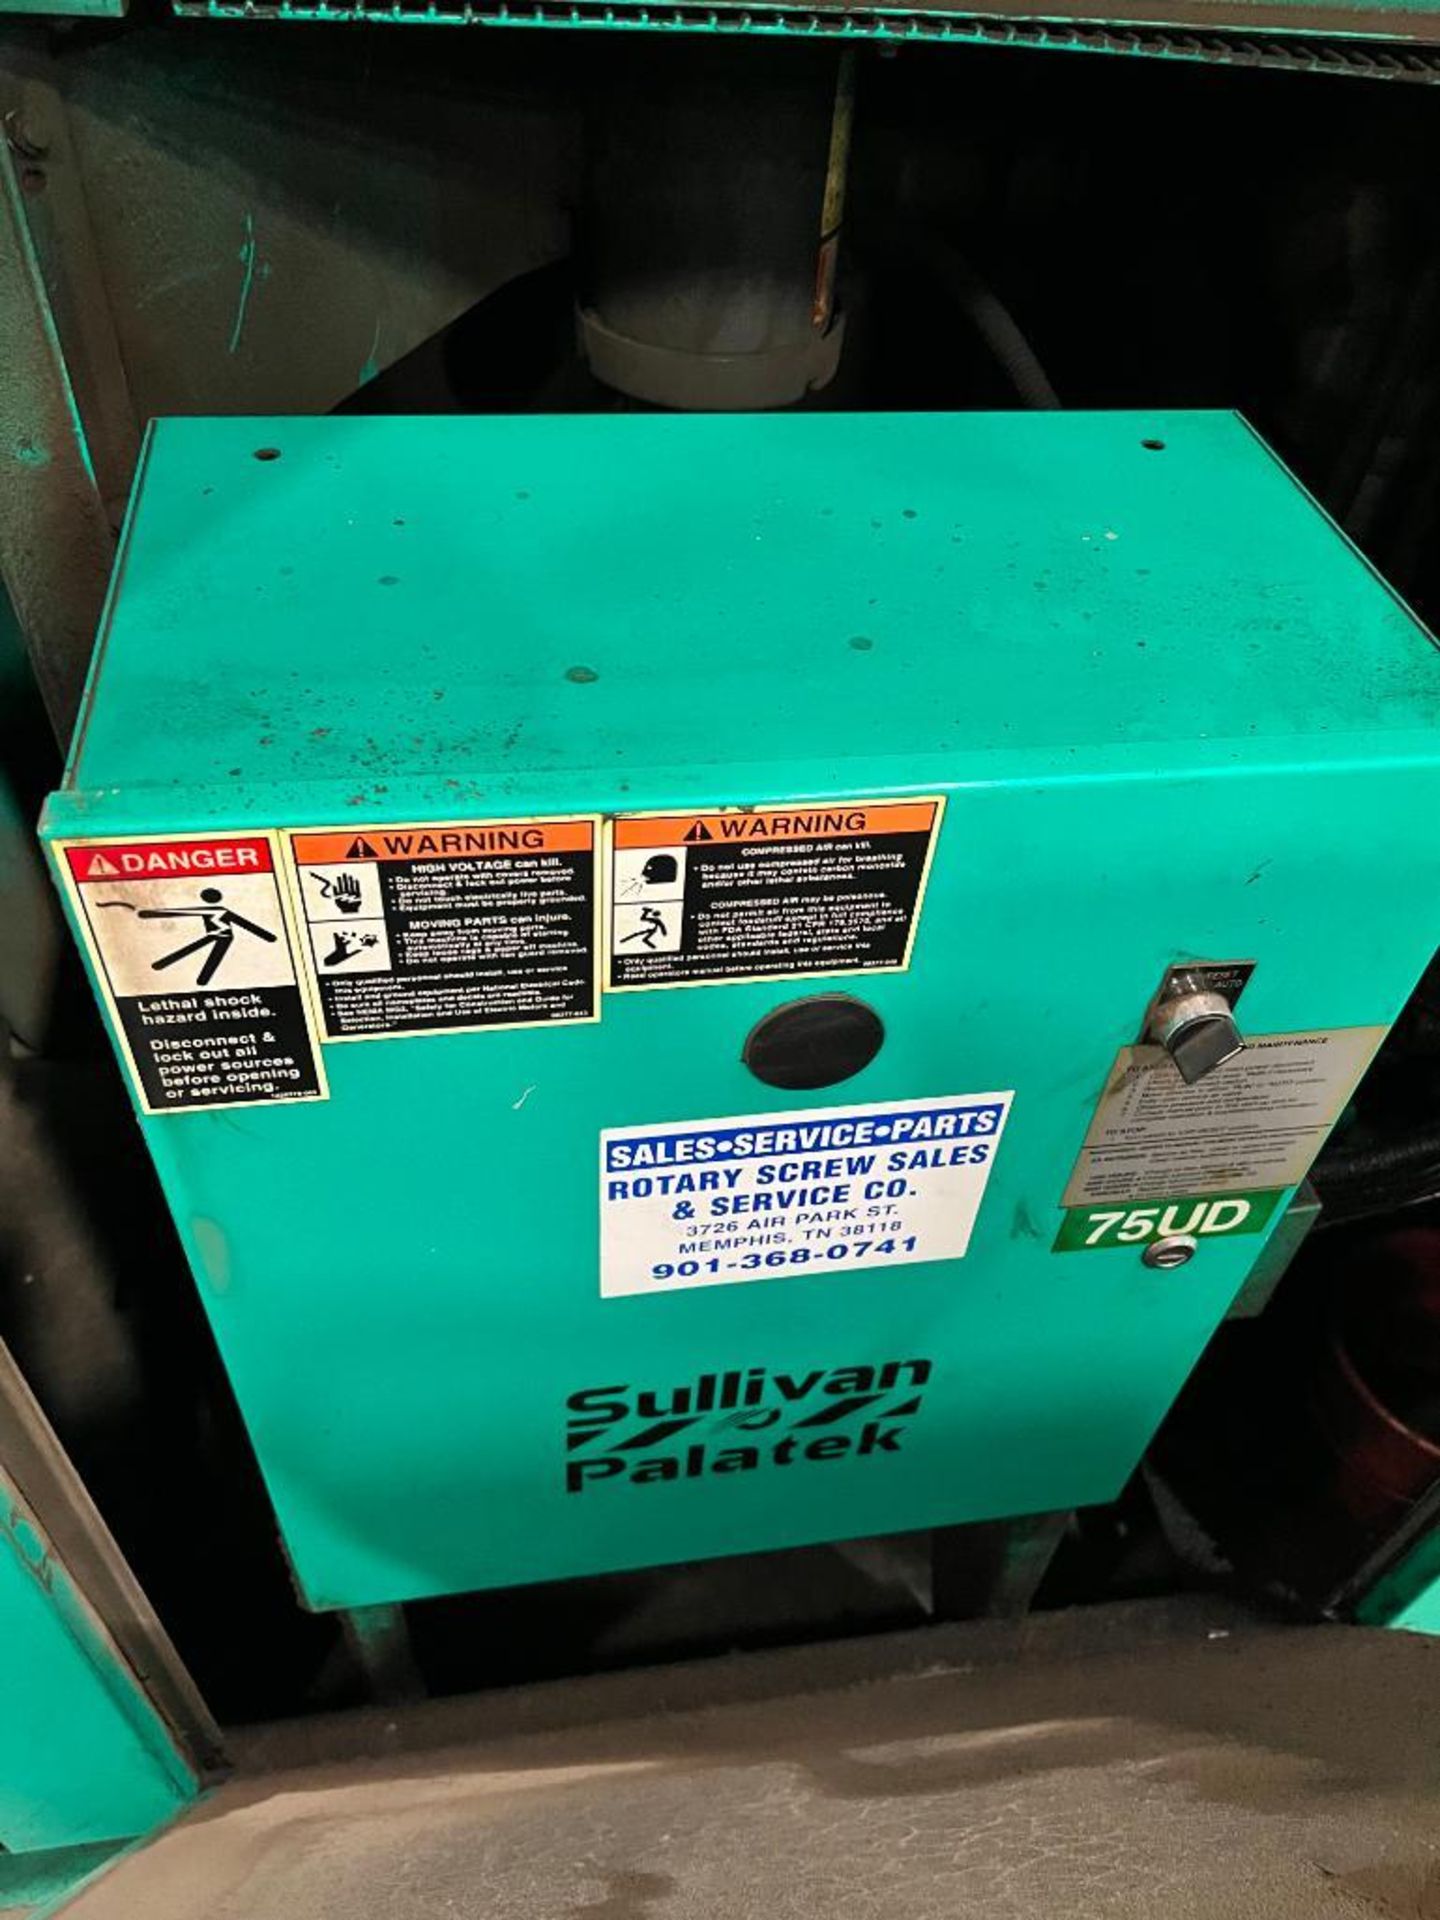 Sullivan-Palatek Air Compressor, Model 75UD, 3 Phase ($50 Loading fee will be added to buyers invoic - Bild 4 aus 5